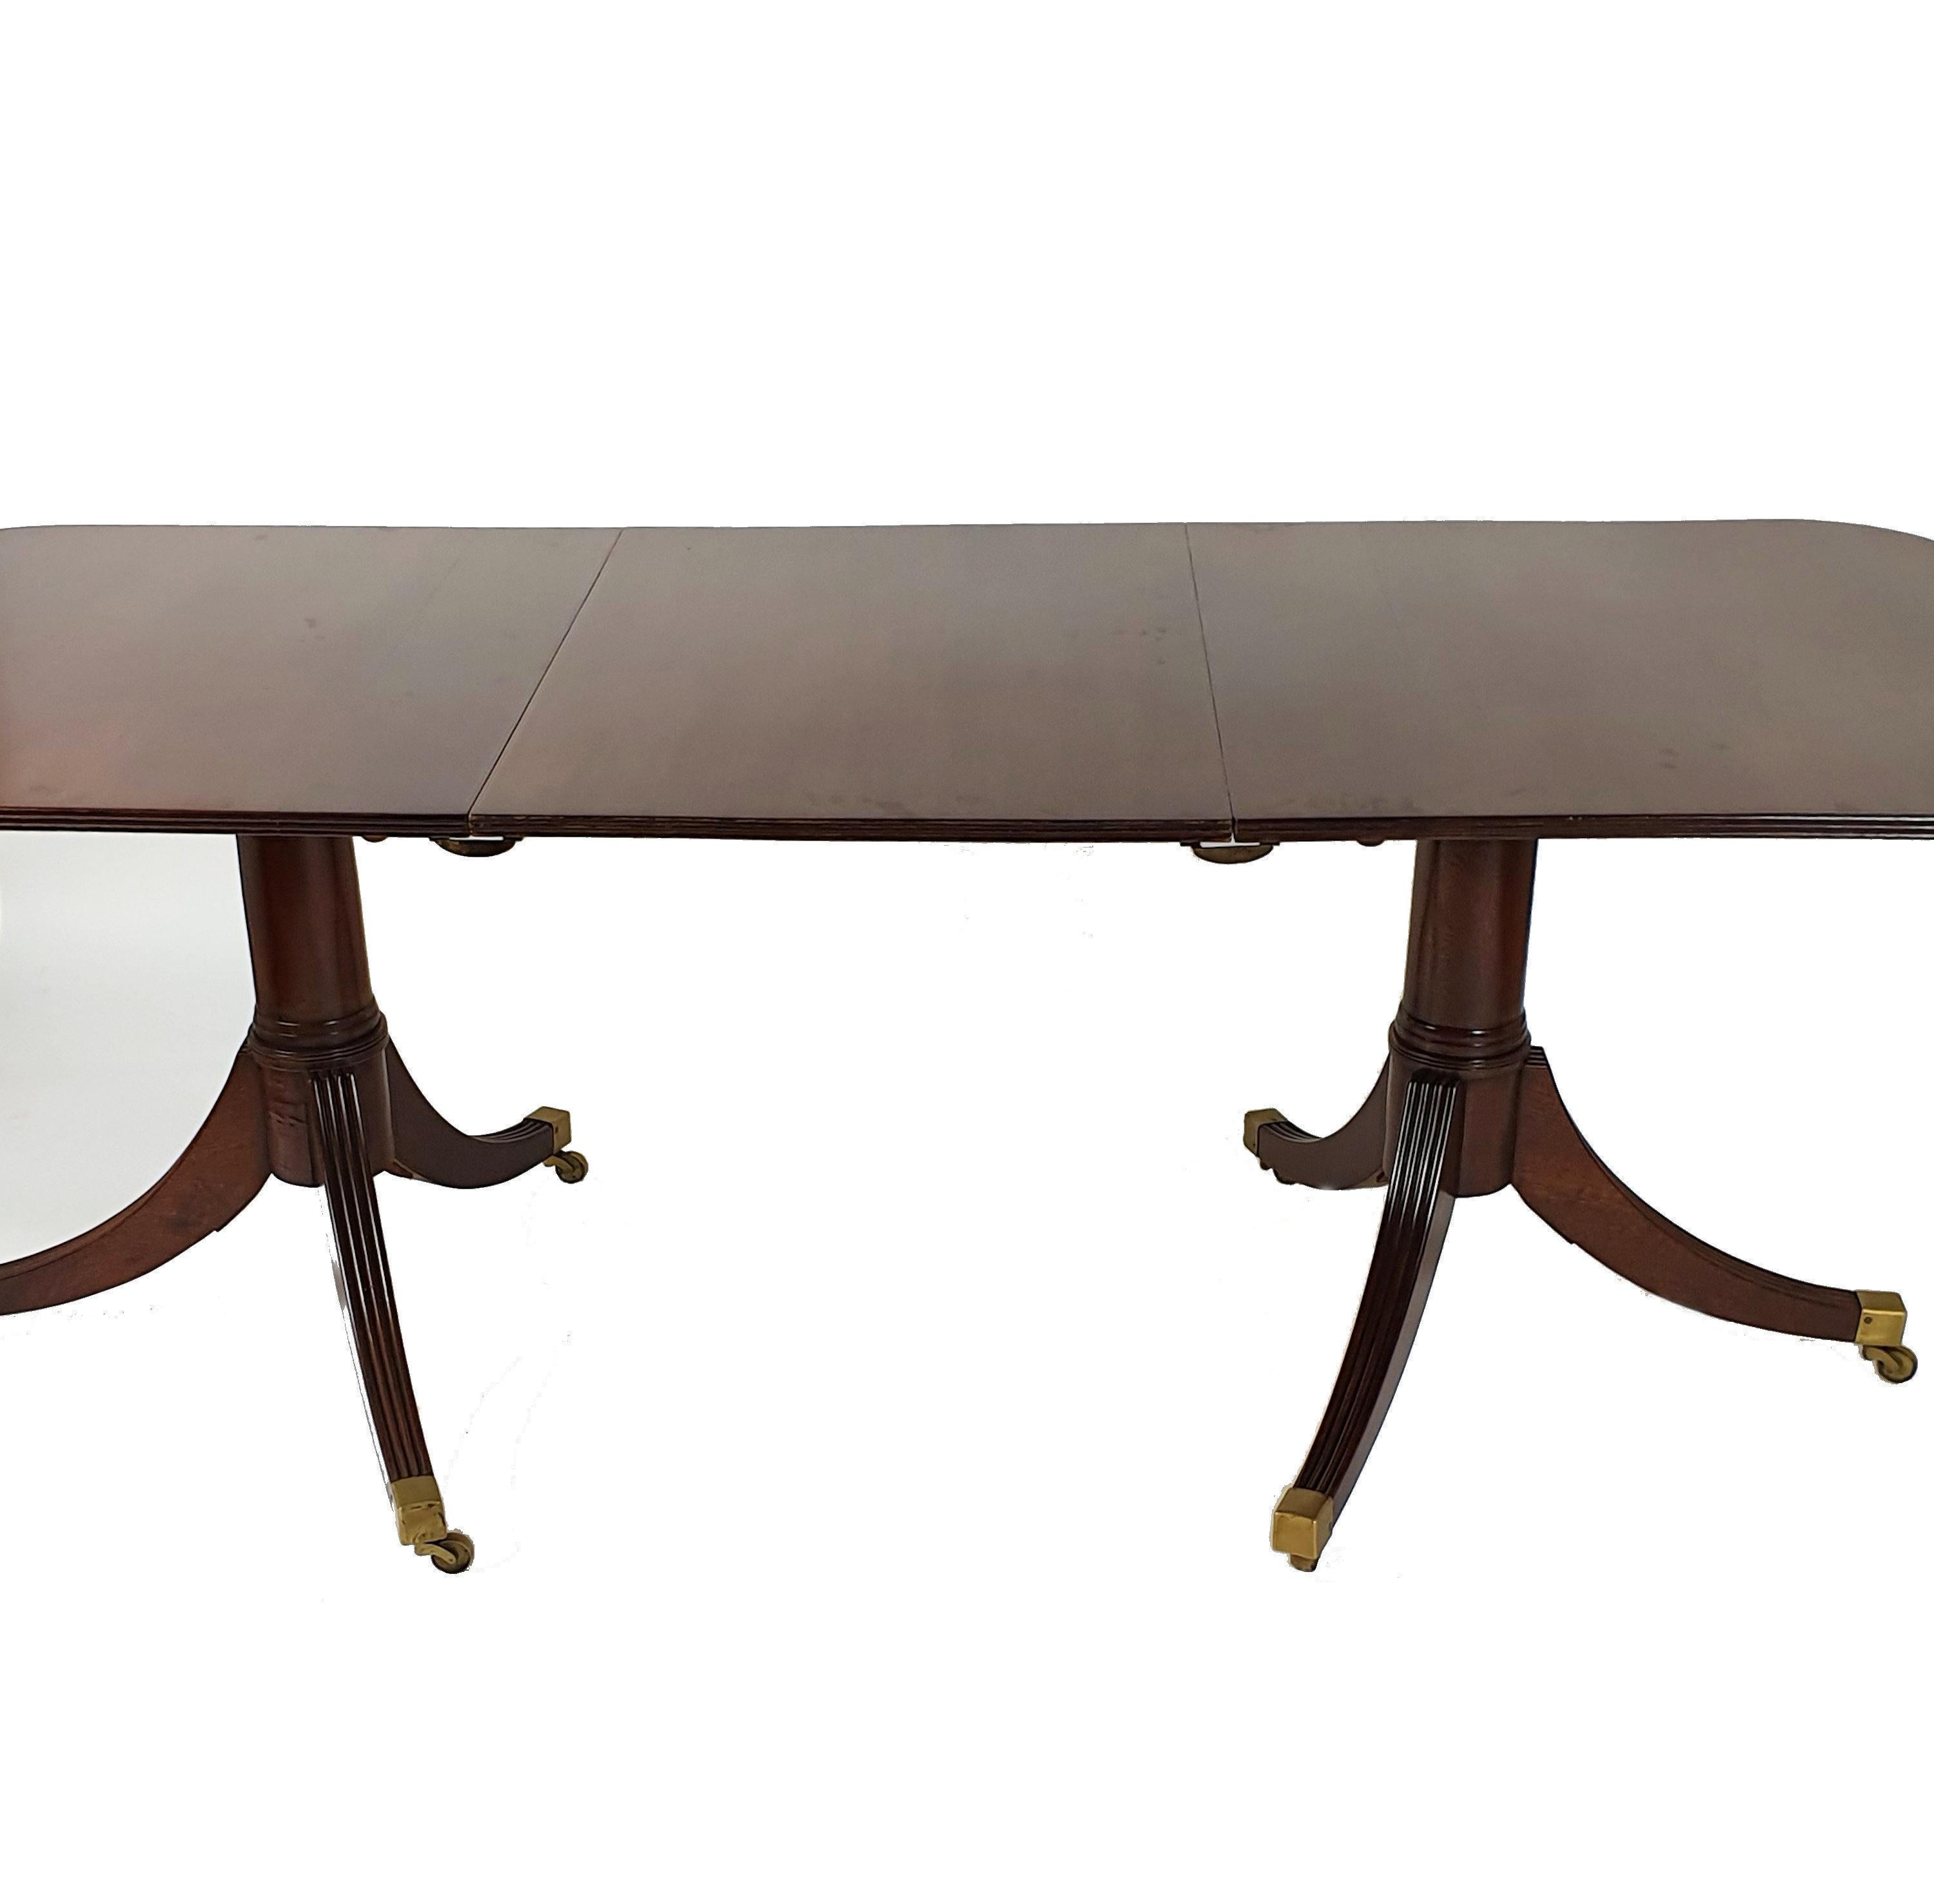 This very attractive and well-proportioned mahogany dining table has a lovely patina top and stands on twin pedestal tri pod legs with one central removable leaf. The table ends and the leaf attach together with brass clips, as well as having brass